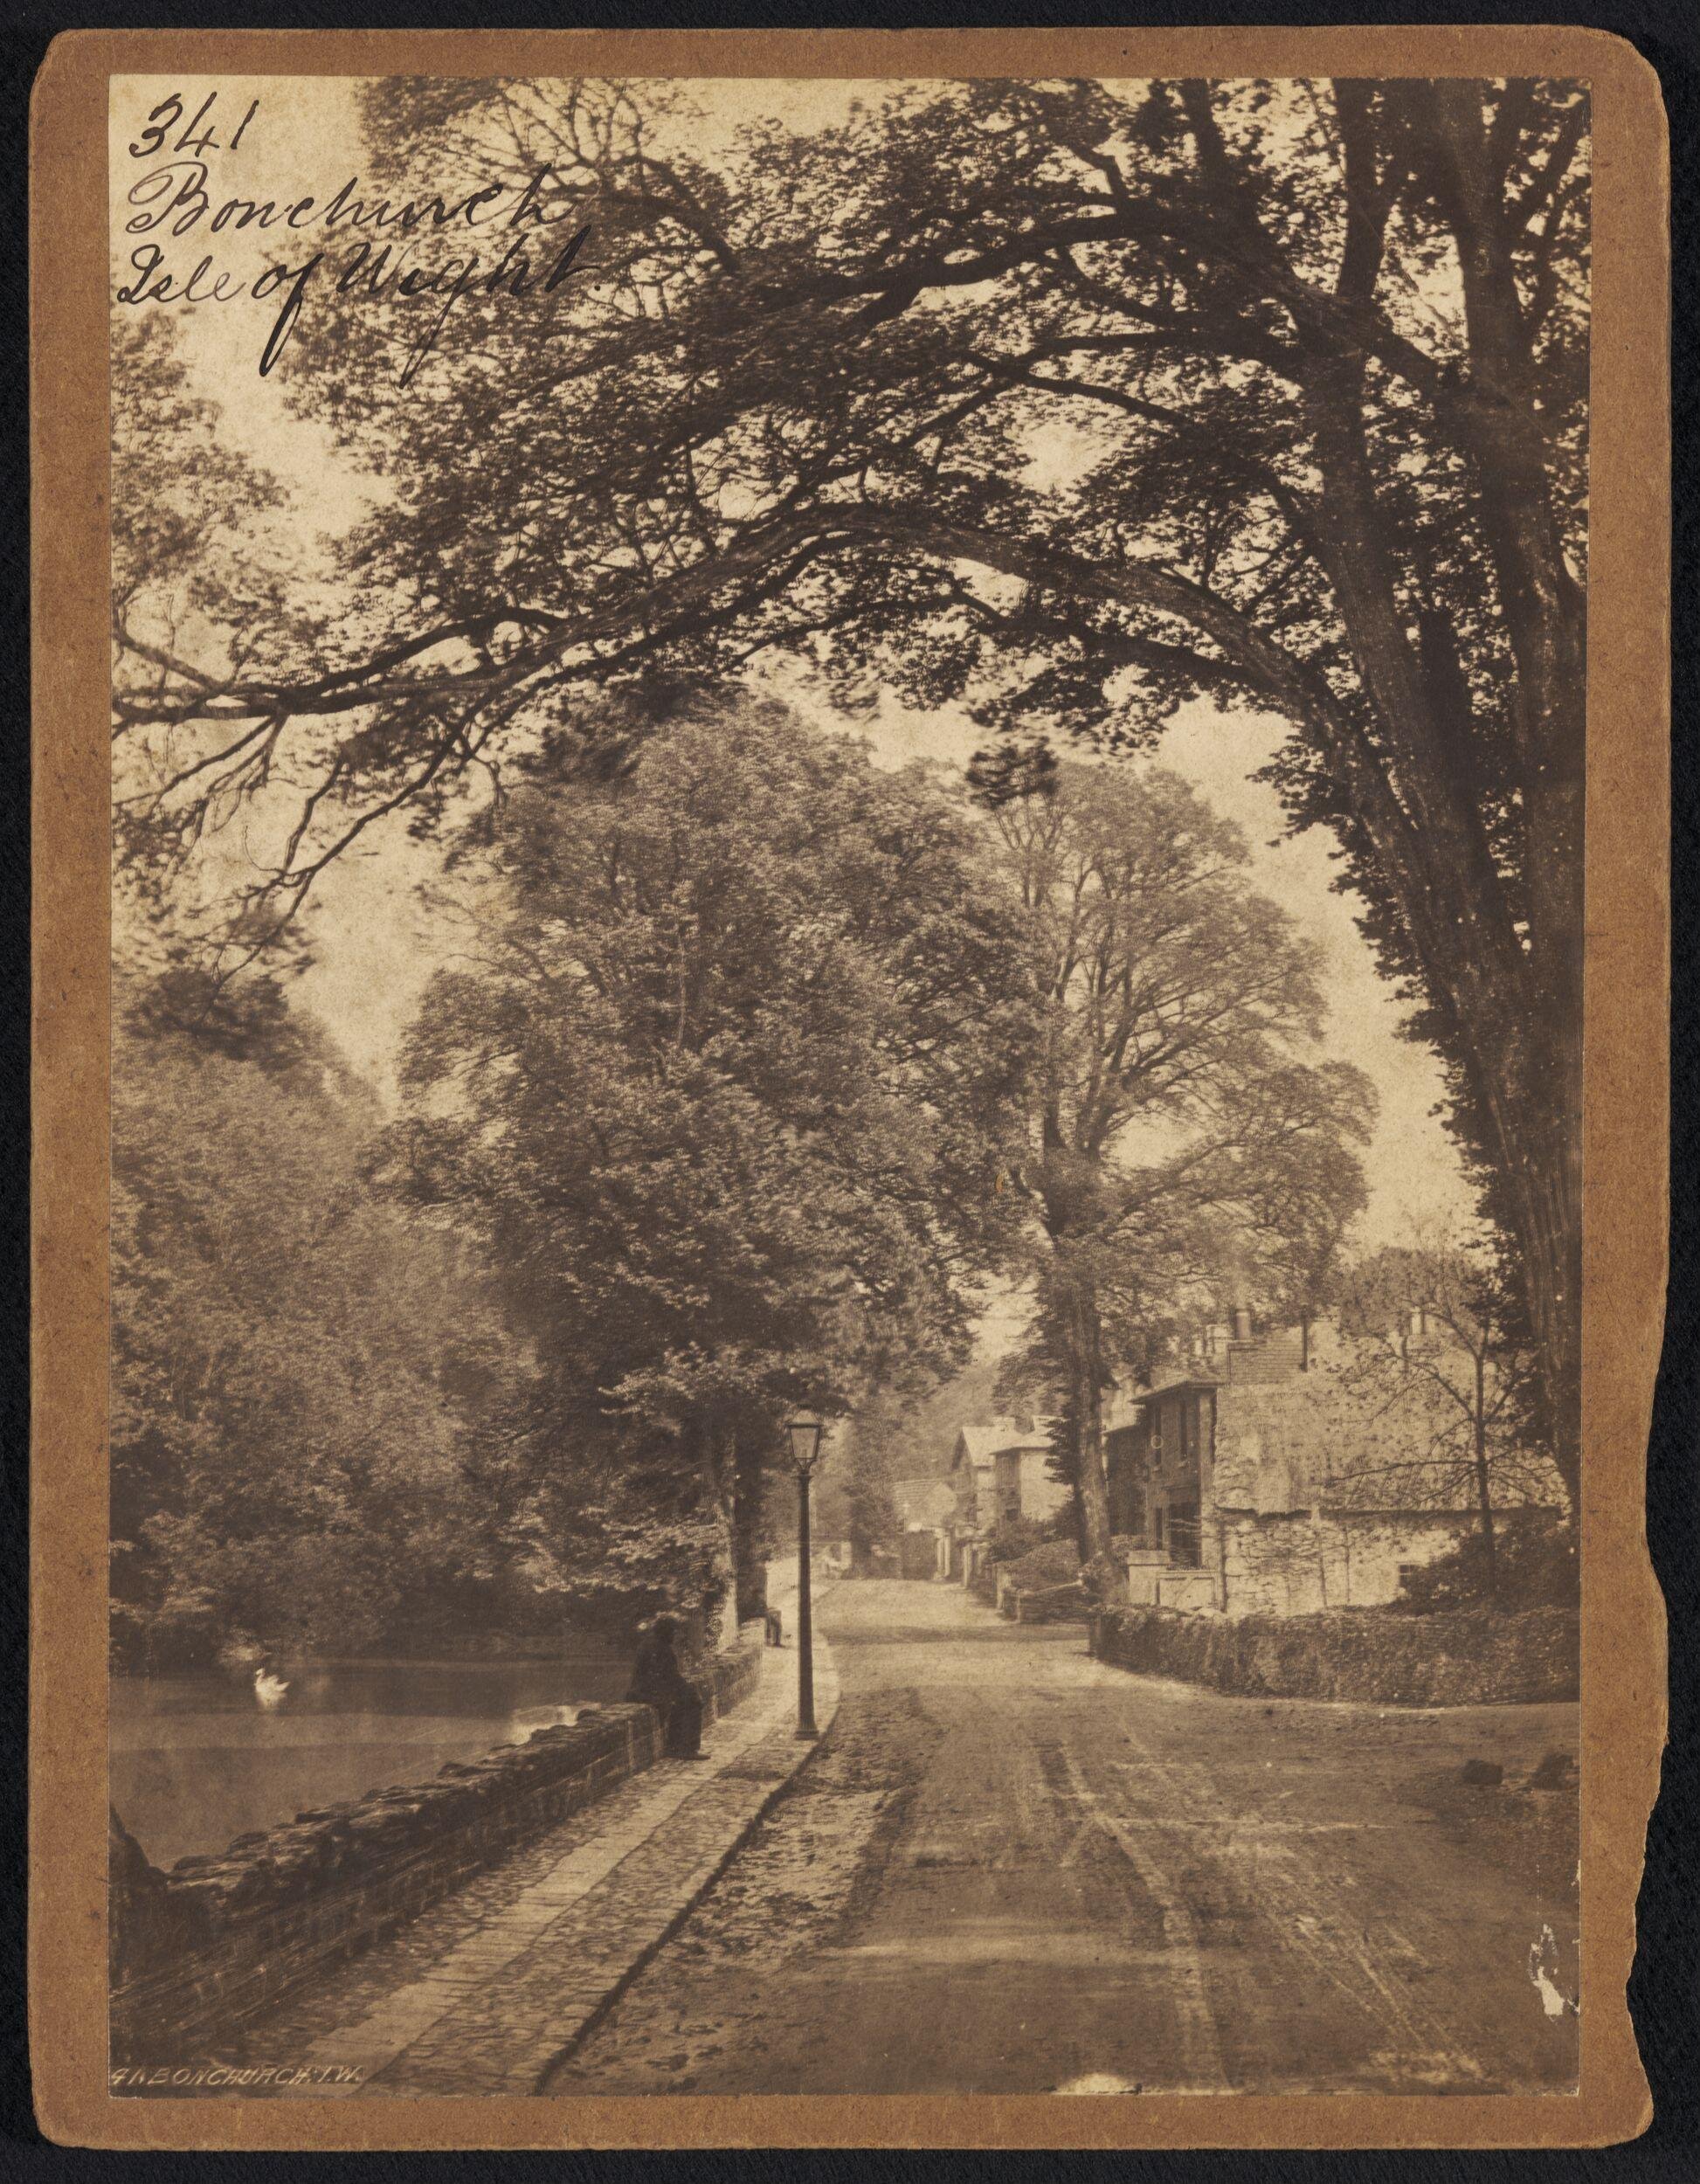 **Photograph by Francis Frith; Bonchurch, c.1860 (Victoria and Albert Museum
        E.208:456-1994). Click to enlarge.